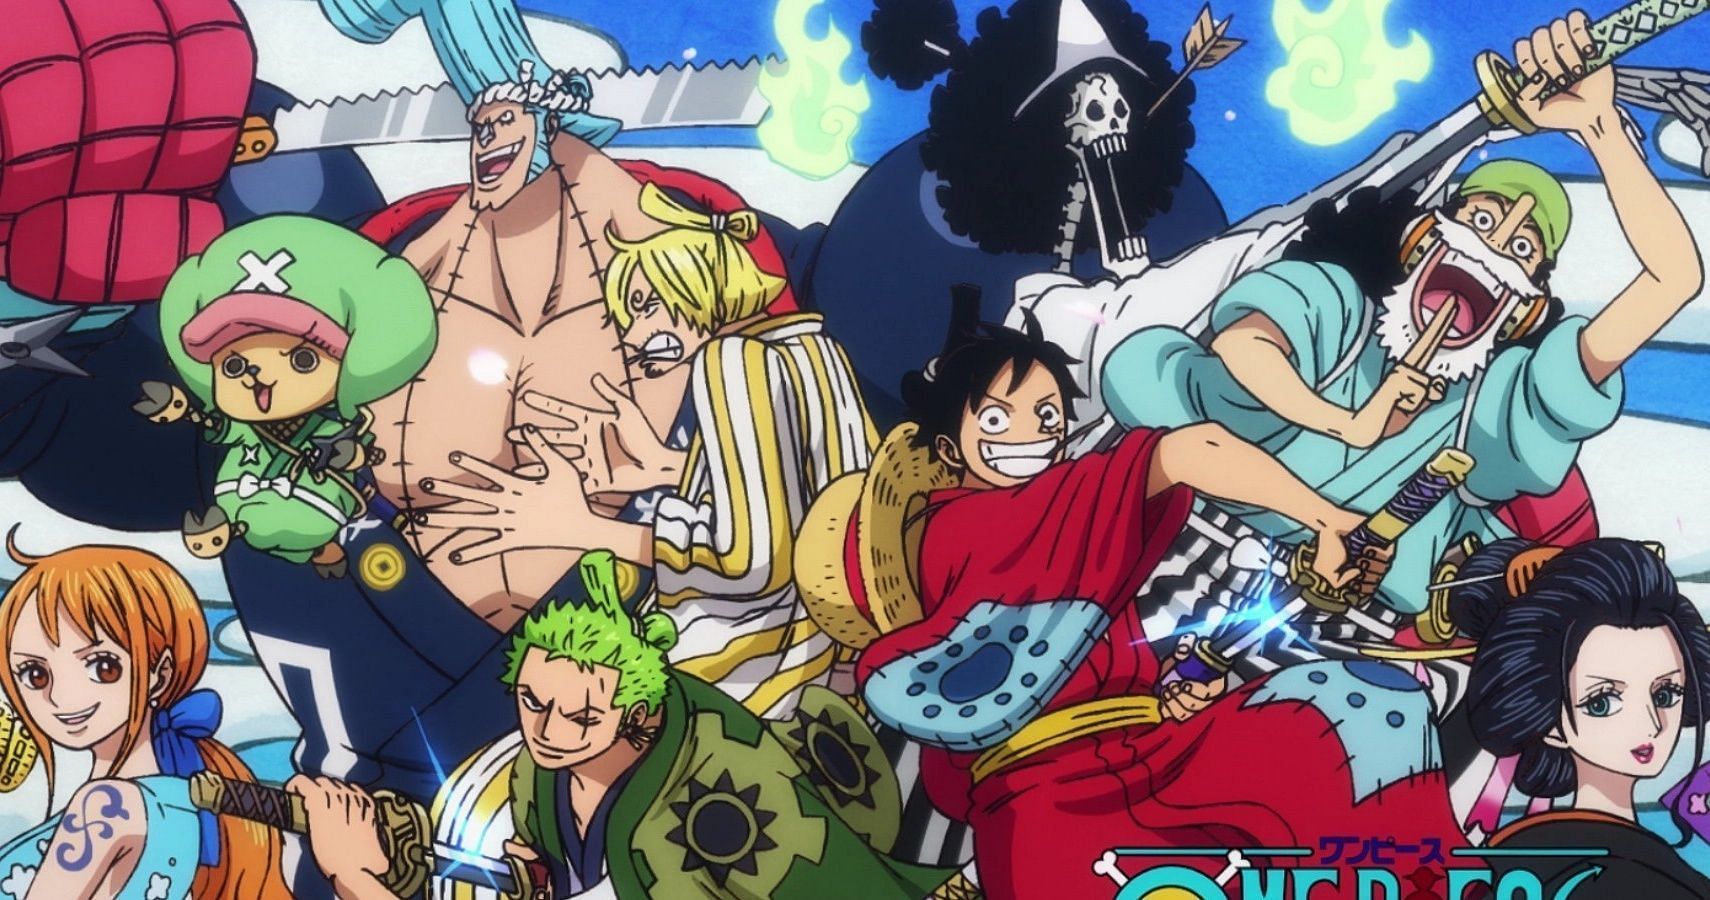 After One Piece, how many anime series have reached 1000 episodes?